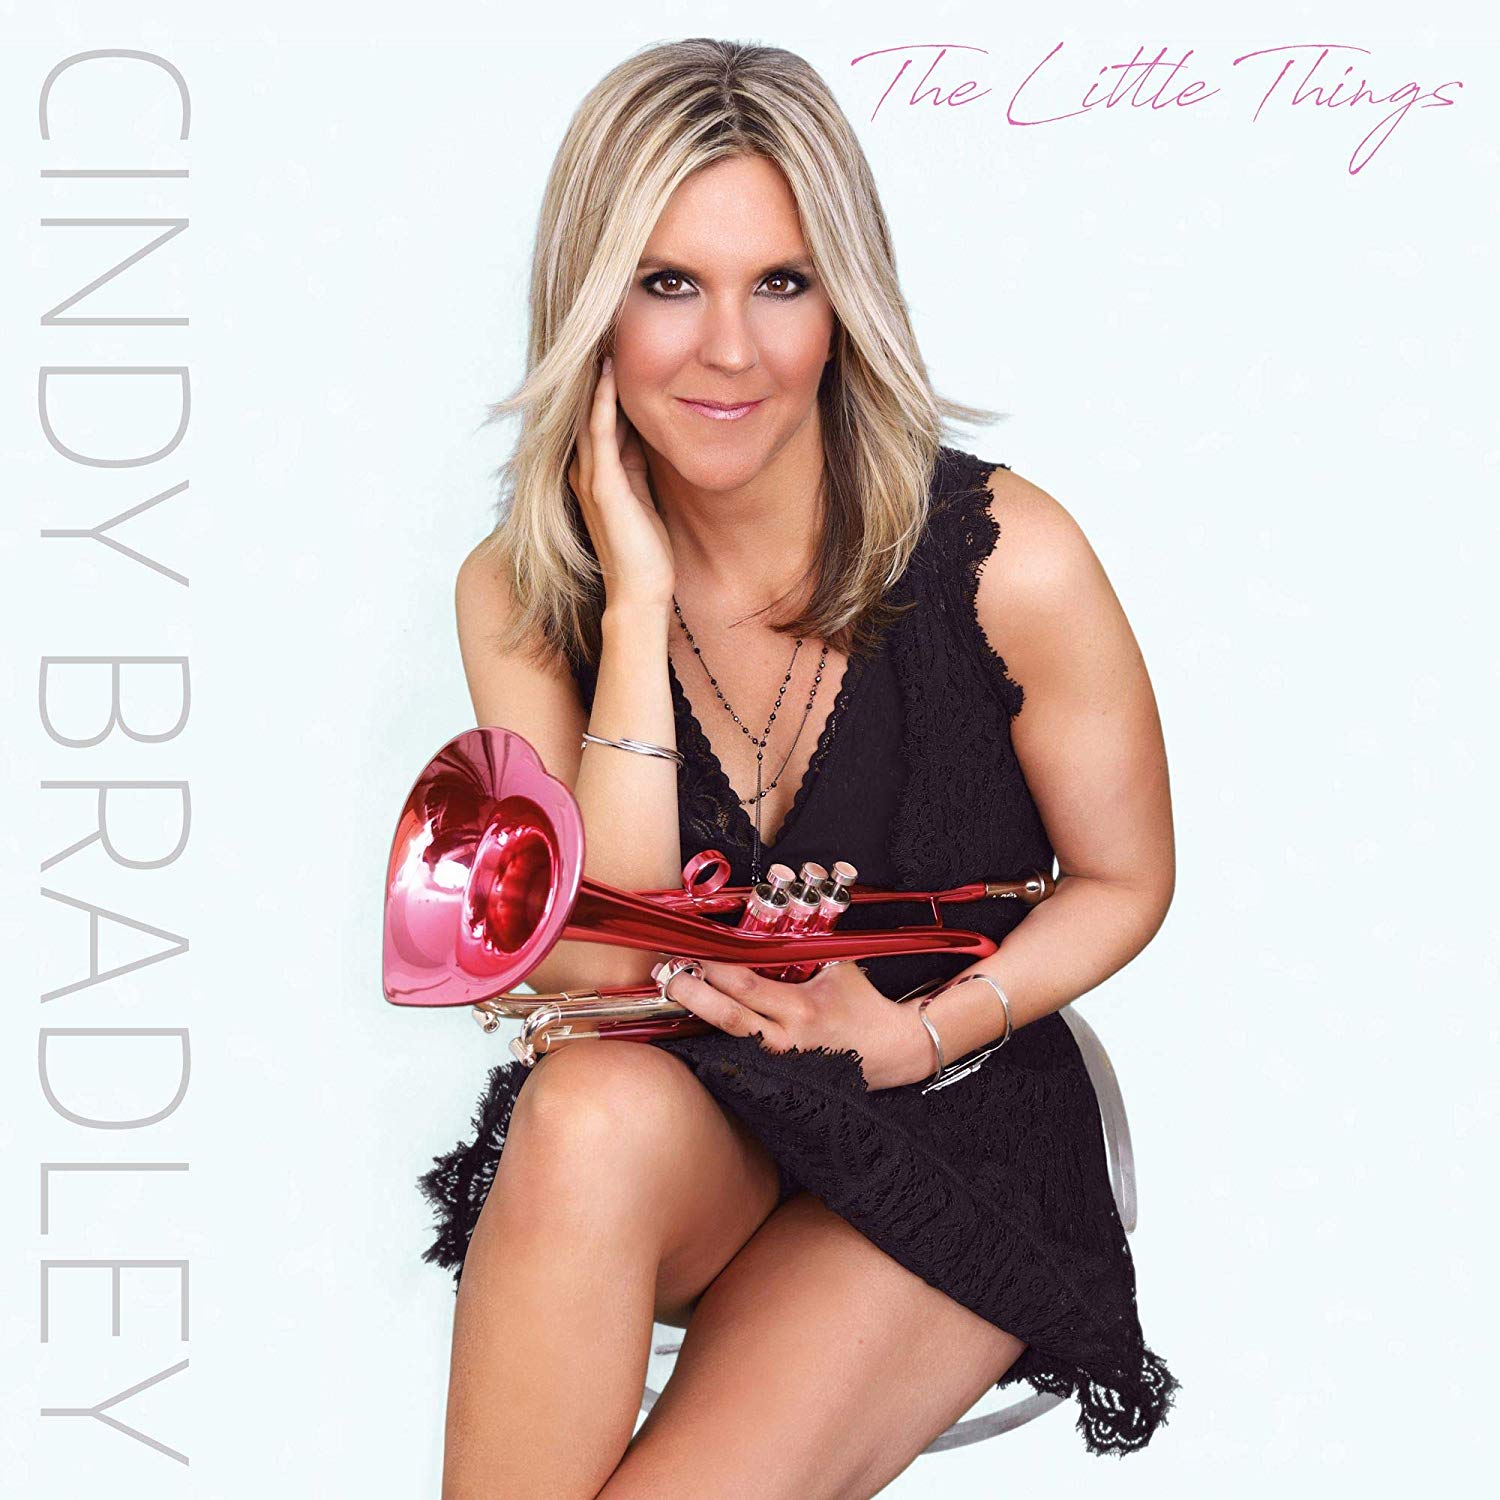 CINDY BRADLEY - The Little Things cover 